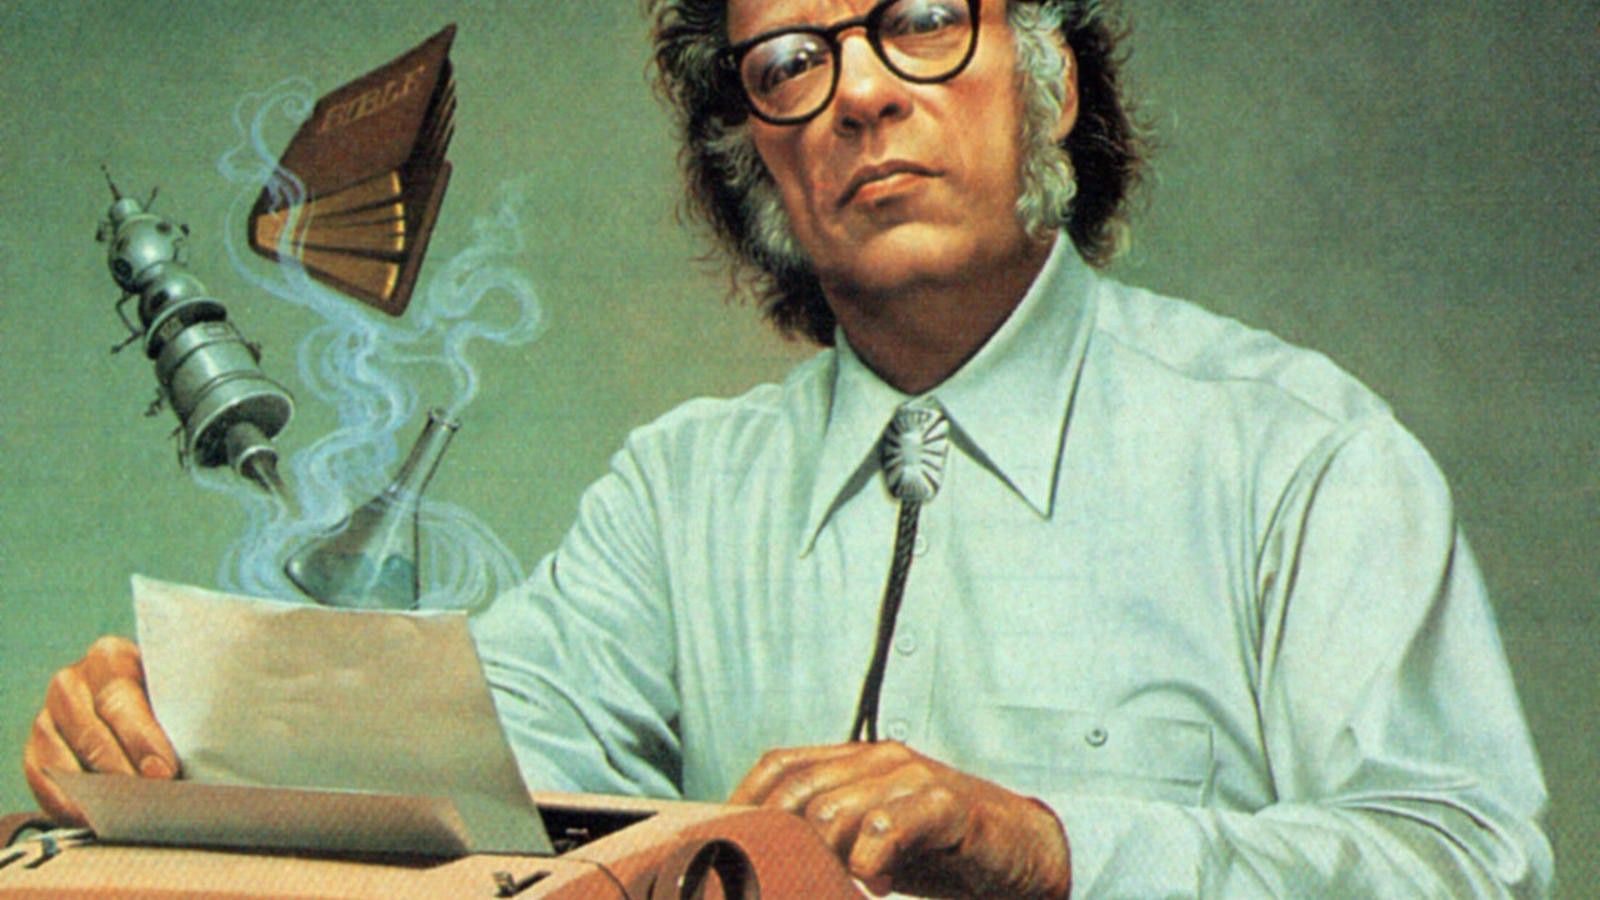 These are Isaac Asimov's 1983 predictions of the world. by David Alayón